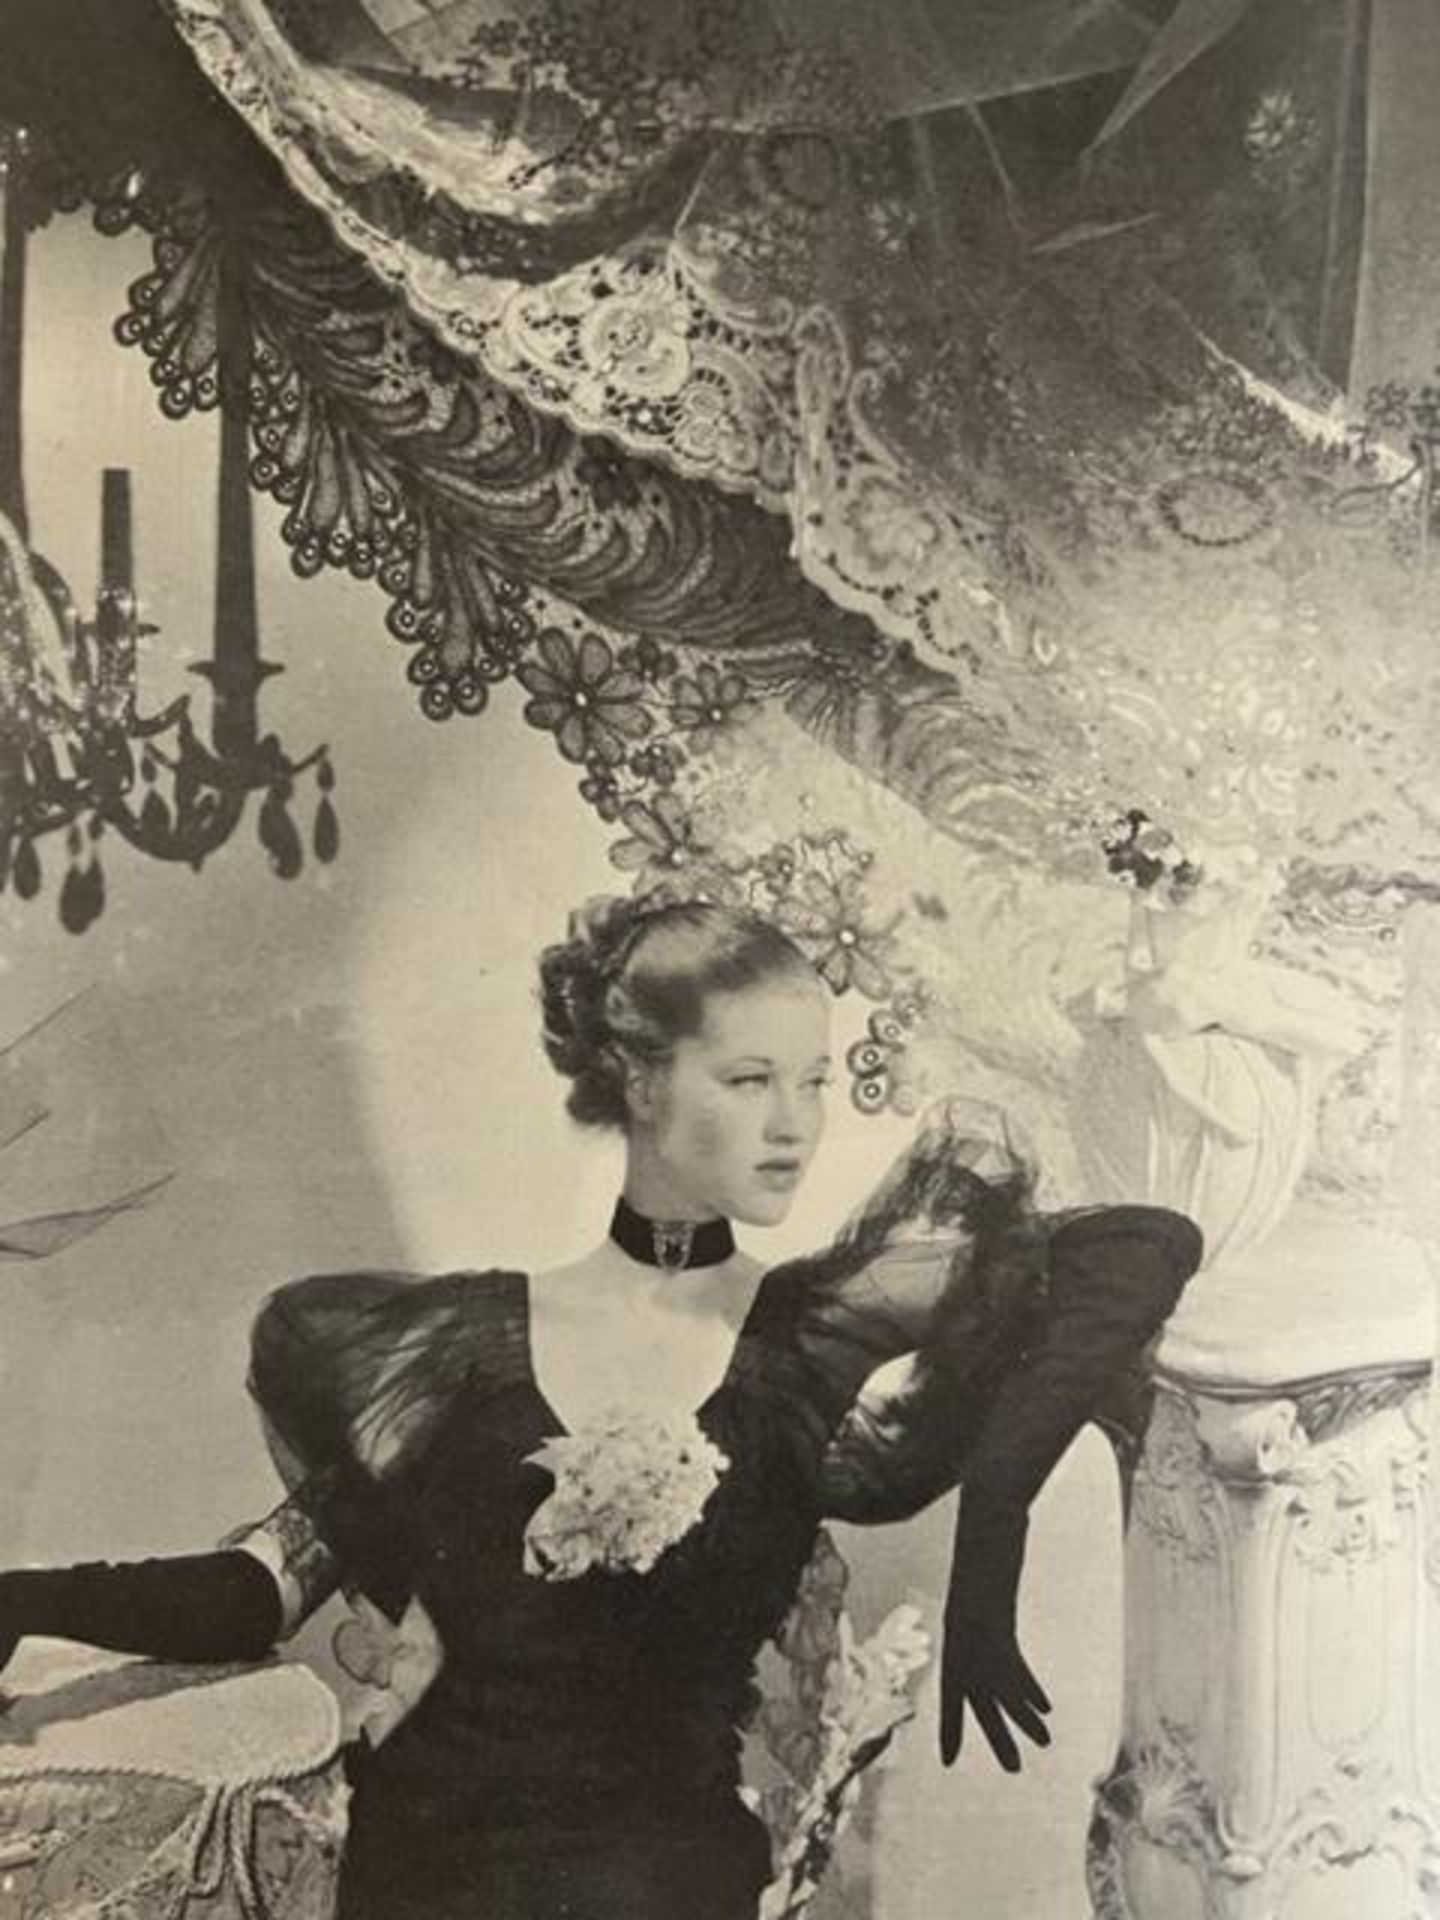 Cecil Beaton "Mary Taylor" Print. - Image 5 of 6